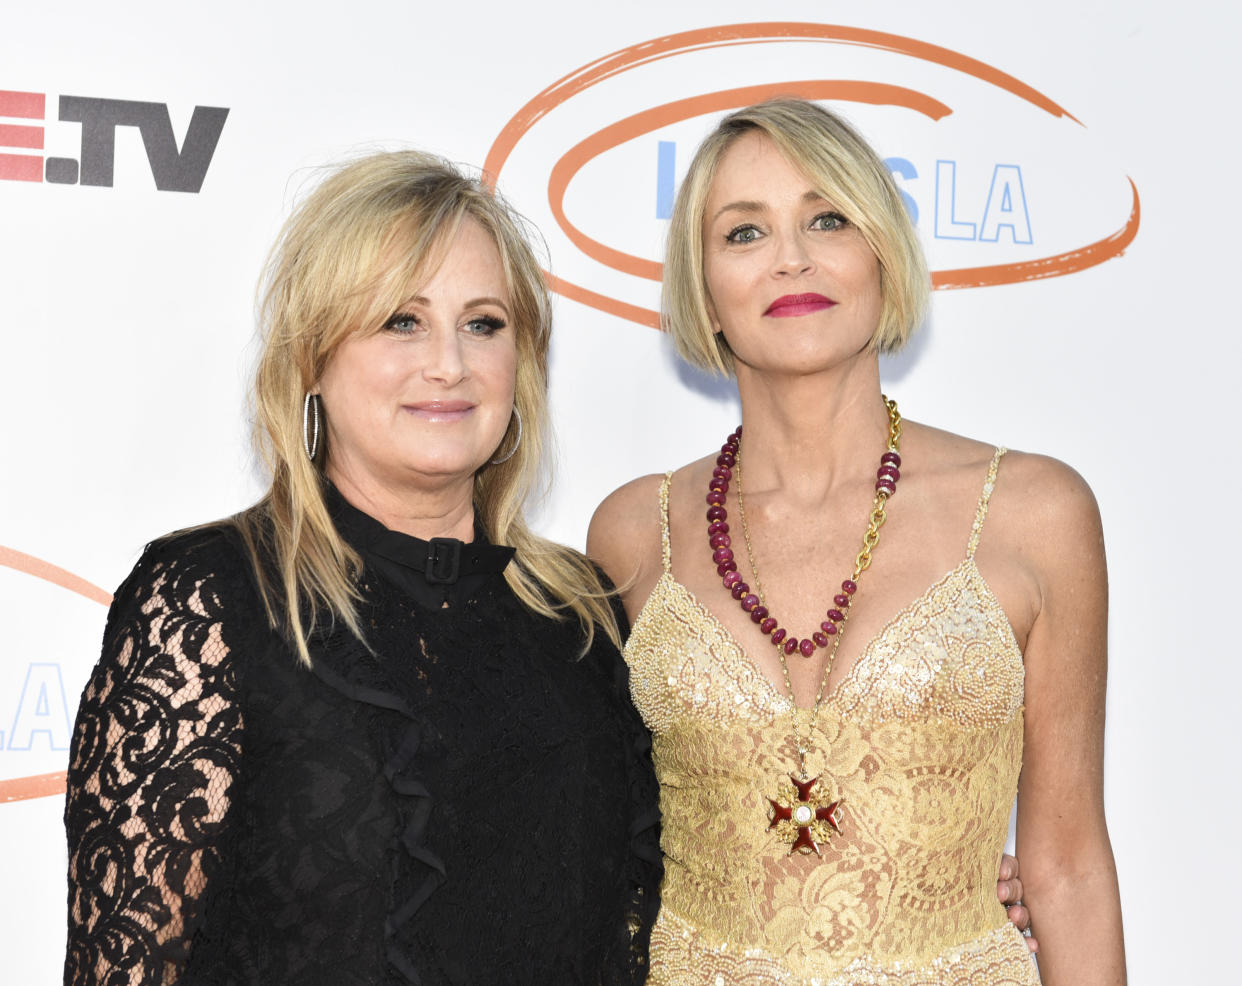 Sharon Stone (L) and philanthropist Kelly Stone attend Lupus LA's 2017 Orange Ball: Rocket To A Cure at California Science Center on April 22, 2017 in Los Angeles, California.  (Photo by Rodin Eckenroth/WireImage)